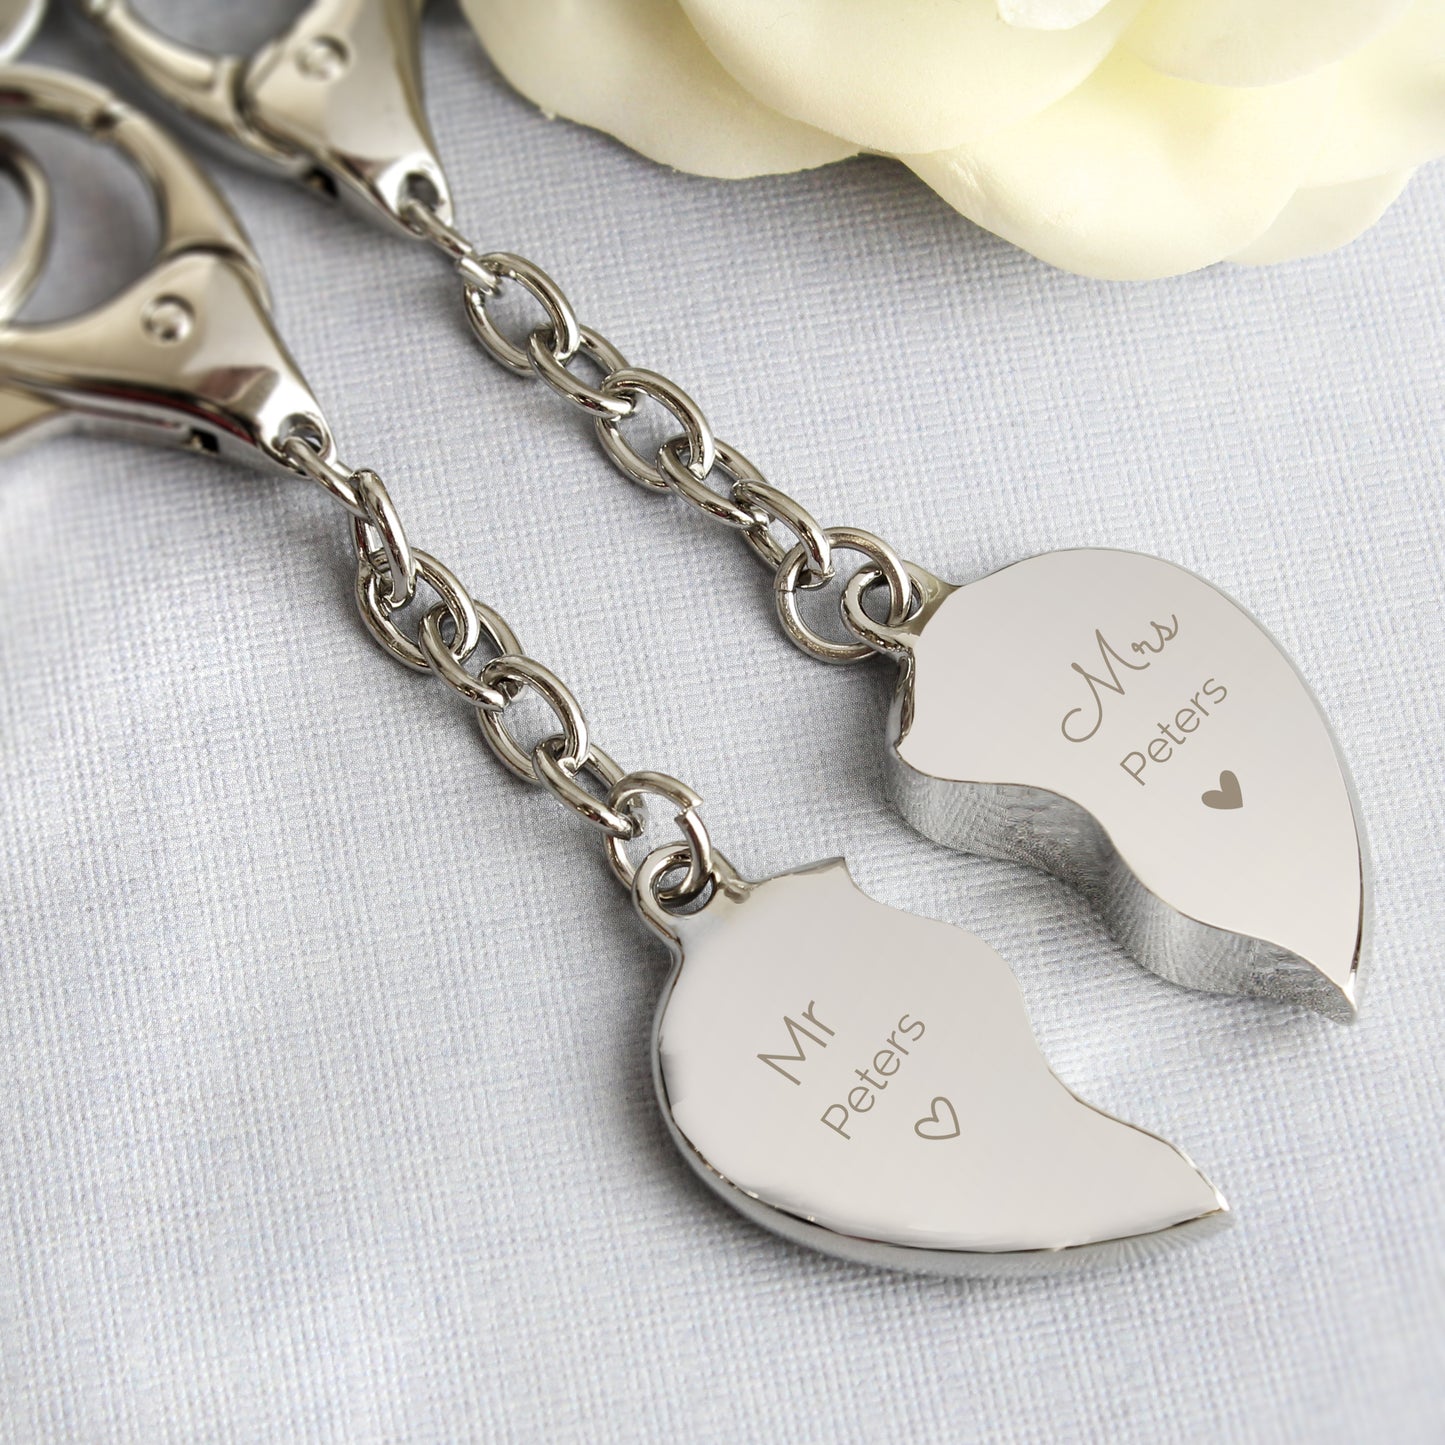 Two key rings when joined together form a heart. Each keyring is personalised with Mr or Mrs and the surname of your choice.